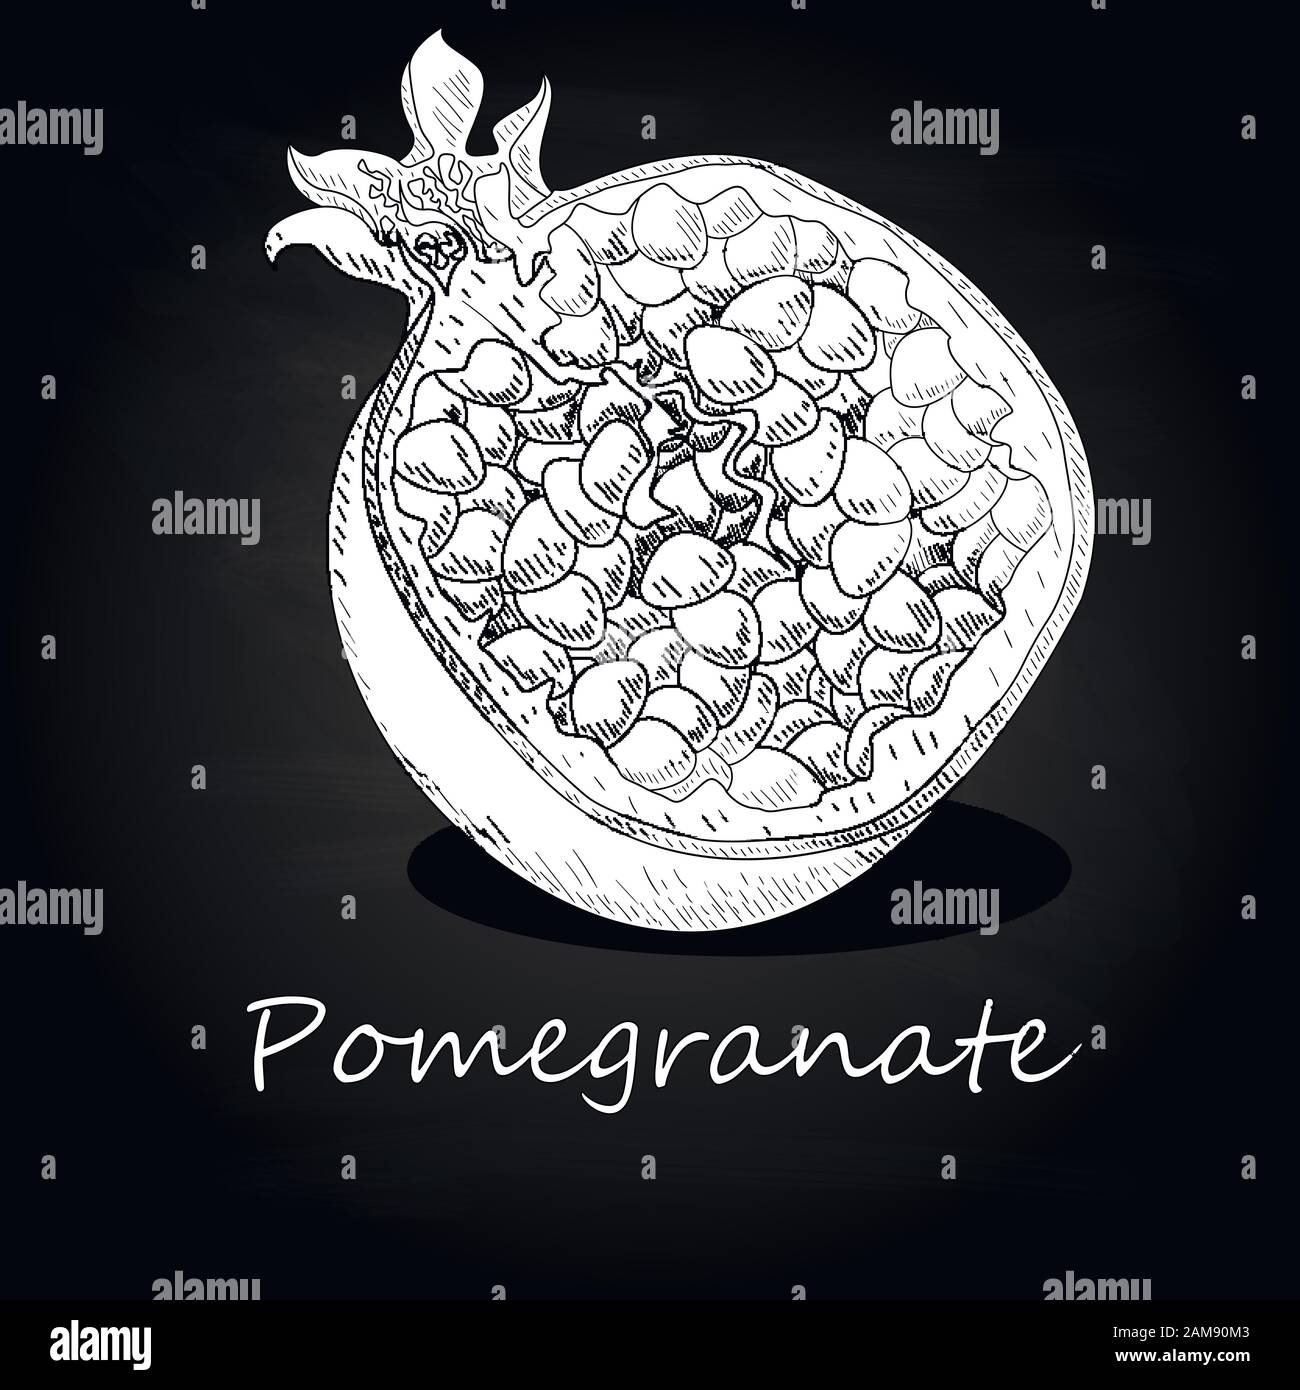 Pomegranate hand drown vector illustration isolated on black background. Monochrome. Stock Vector